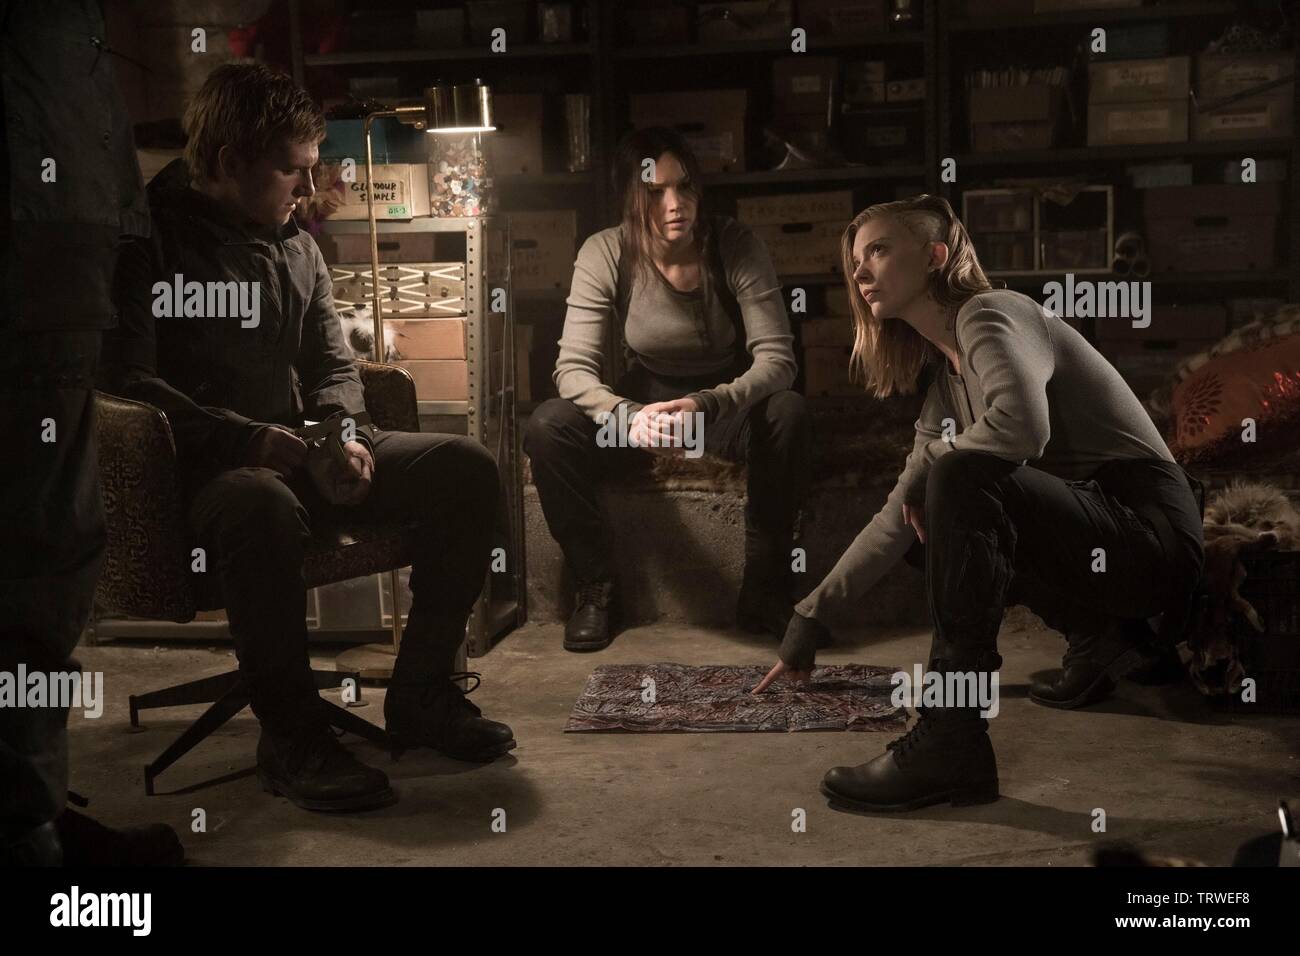 JOSH HUTCHERSON , NATALIE DORMER and JENNIFER LAWRENCE in THE HUNGER GAMES: MOCKINGJAY-PART 2 (2015). Copyright: Editorial use only. No merchandising or book covers. This is a publicly distributed handout. Access rights only, no license of copyright provided. Only to be reproduced in conjunction with promotion of this film. Credit: COLOR FORCE/LIONGATE/STUDIO BABELSBERG / CLOSE, MURRAY / Album Stock Photo